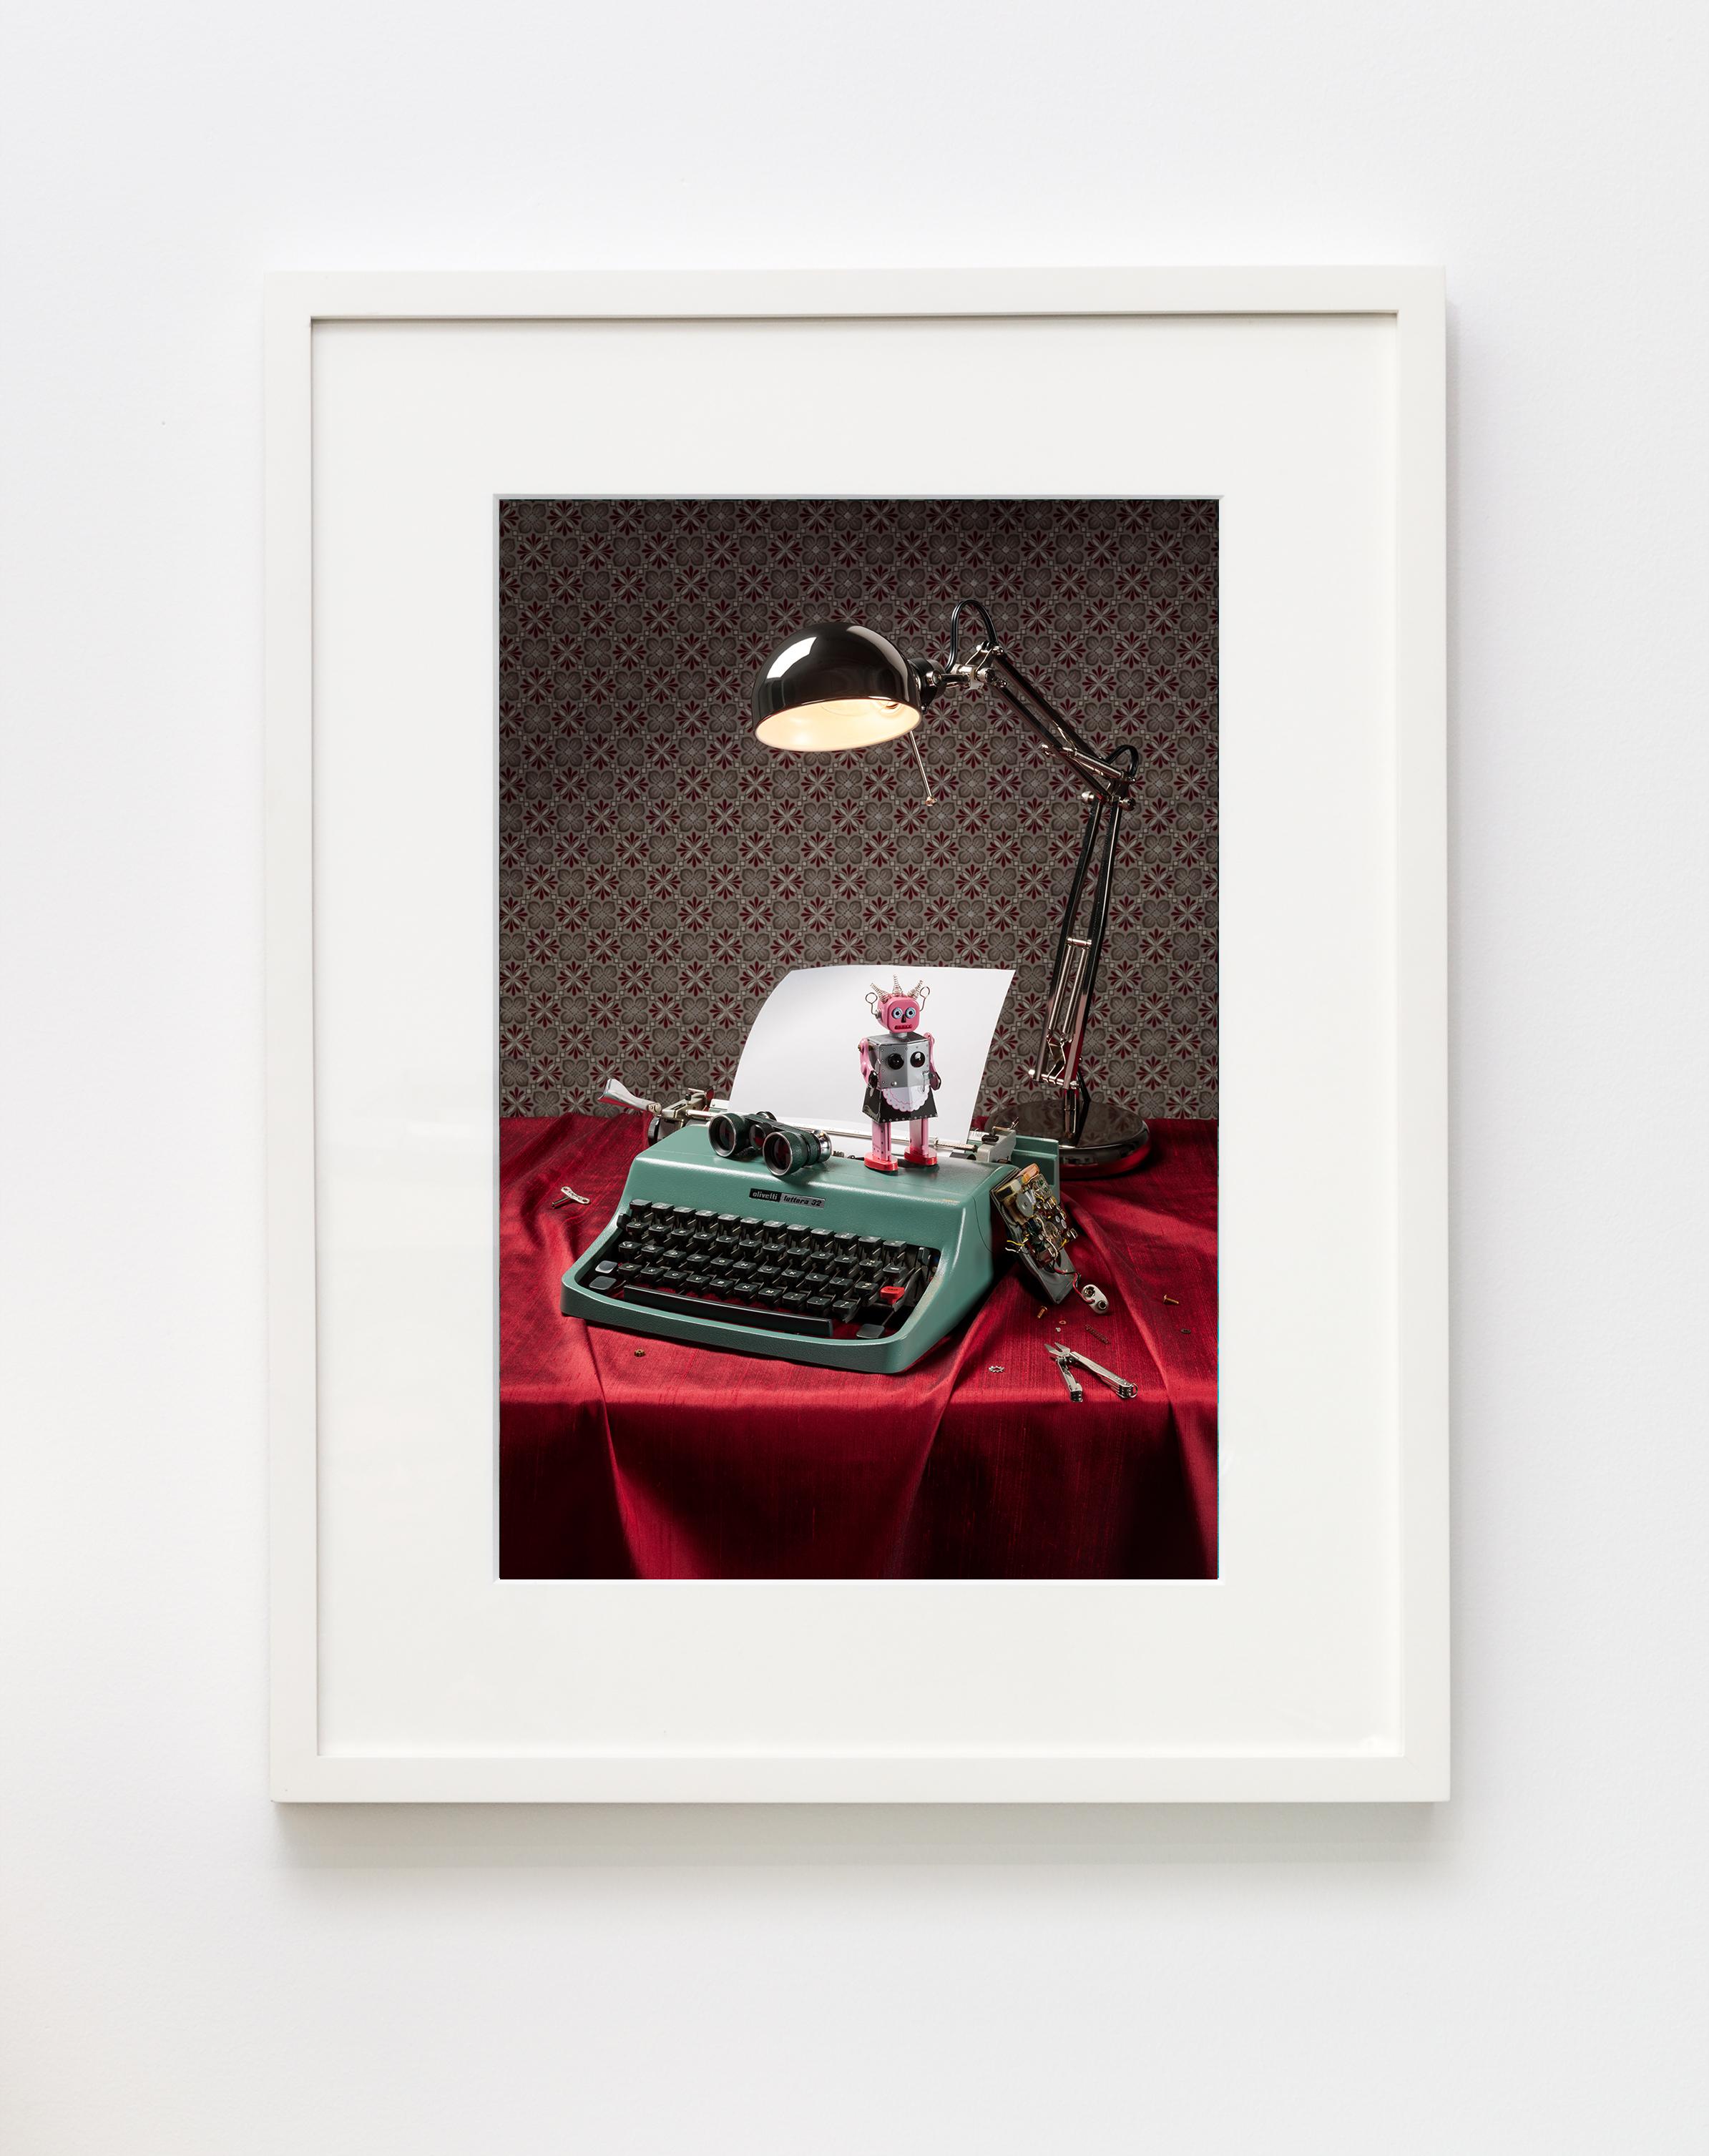 Jeanette May Still-Life Photograph - “Still Life with Robot” Still-life Photograph of Vintage Typewriter and Tin Toy